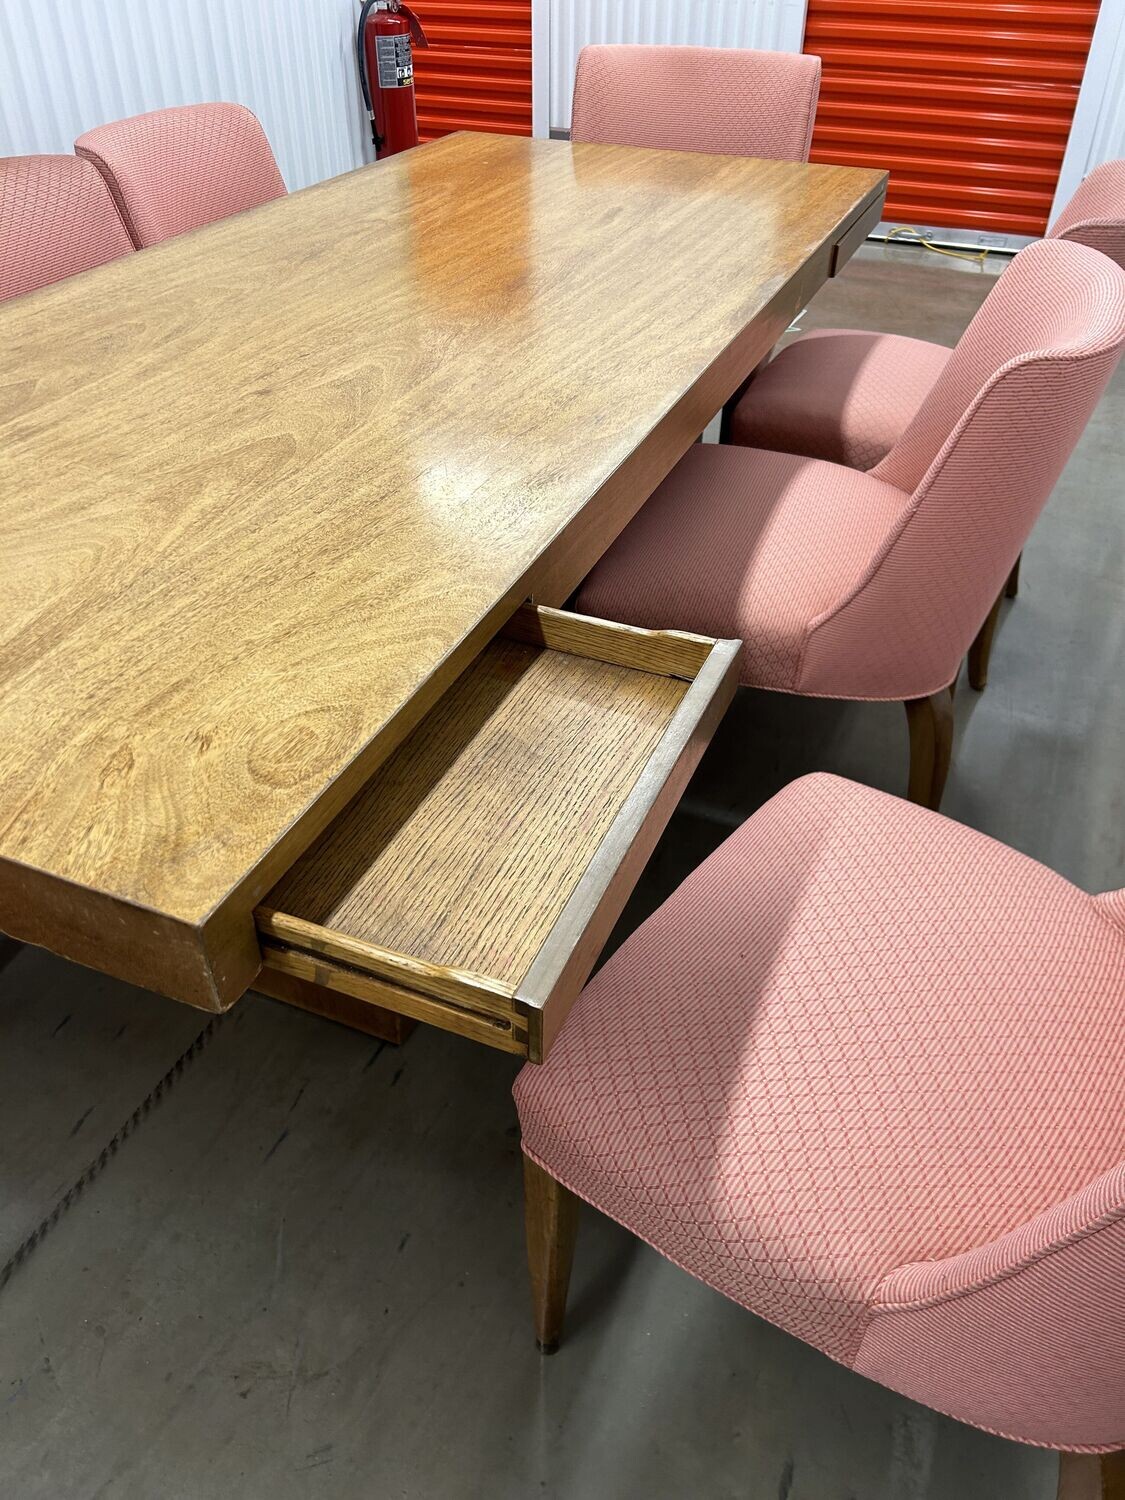 Vintage Dunbar Conference or Dining Table, 7x3 feet #2432 ** 2 days to sell, full price